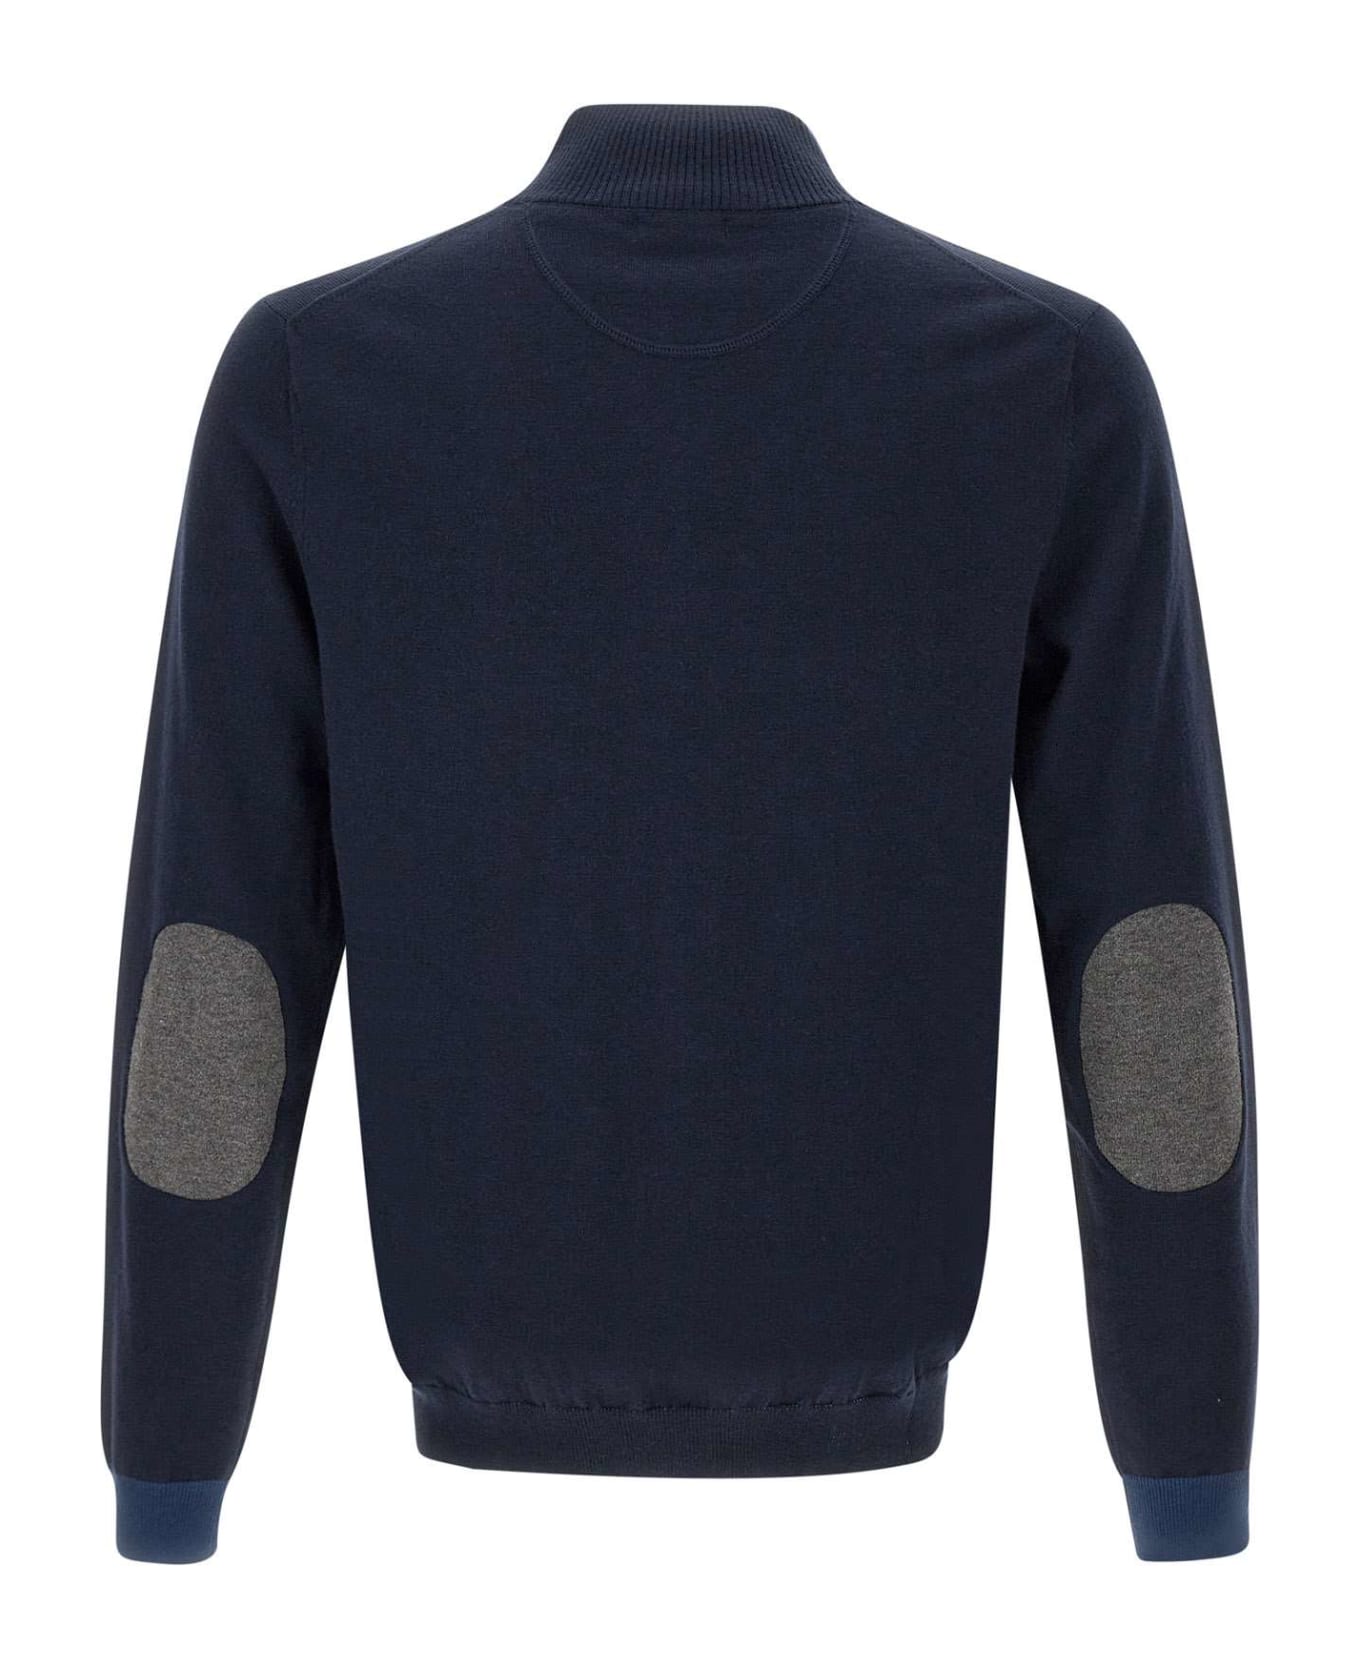 Sun 68 'stripes' Cotton And Wool Sweater Sweater - NAVY BLUE